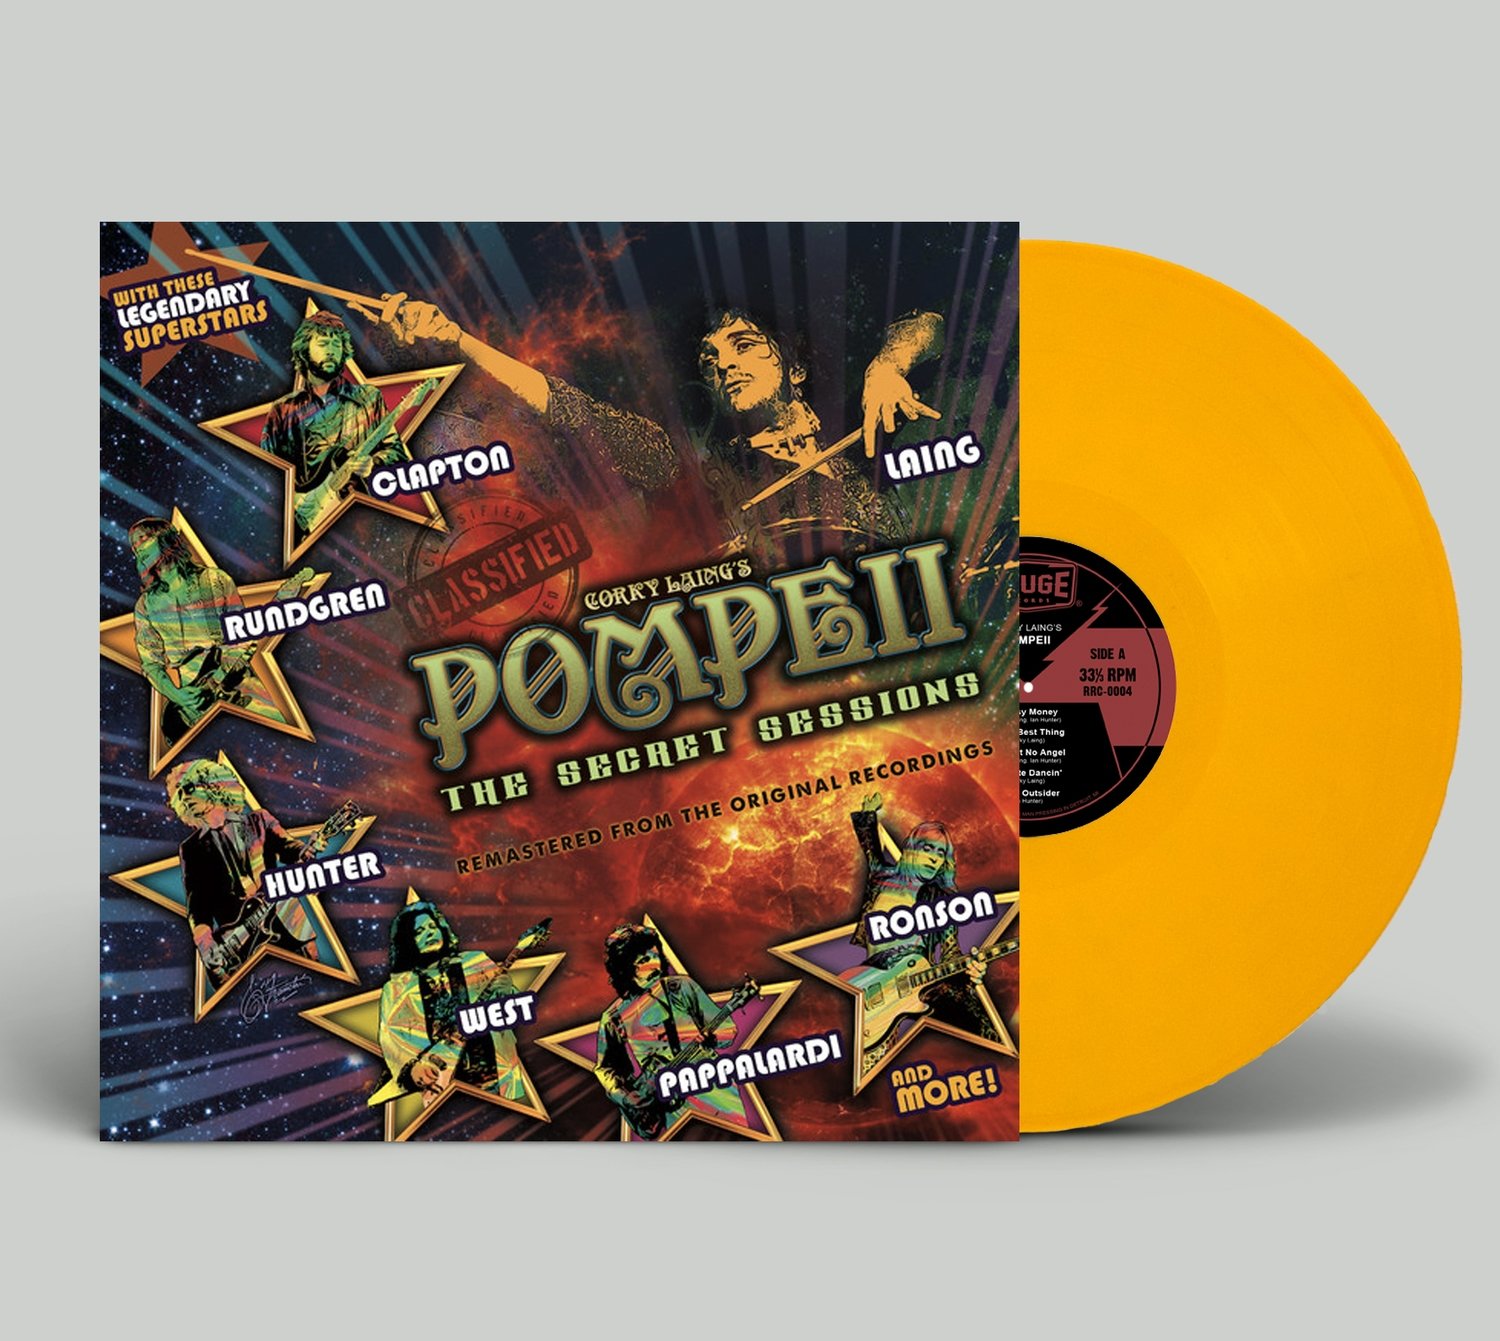 Pompeii "The Secret Sessions" -- Limited Edition Yellow Vinyl